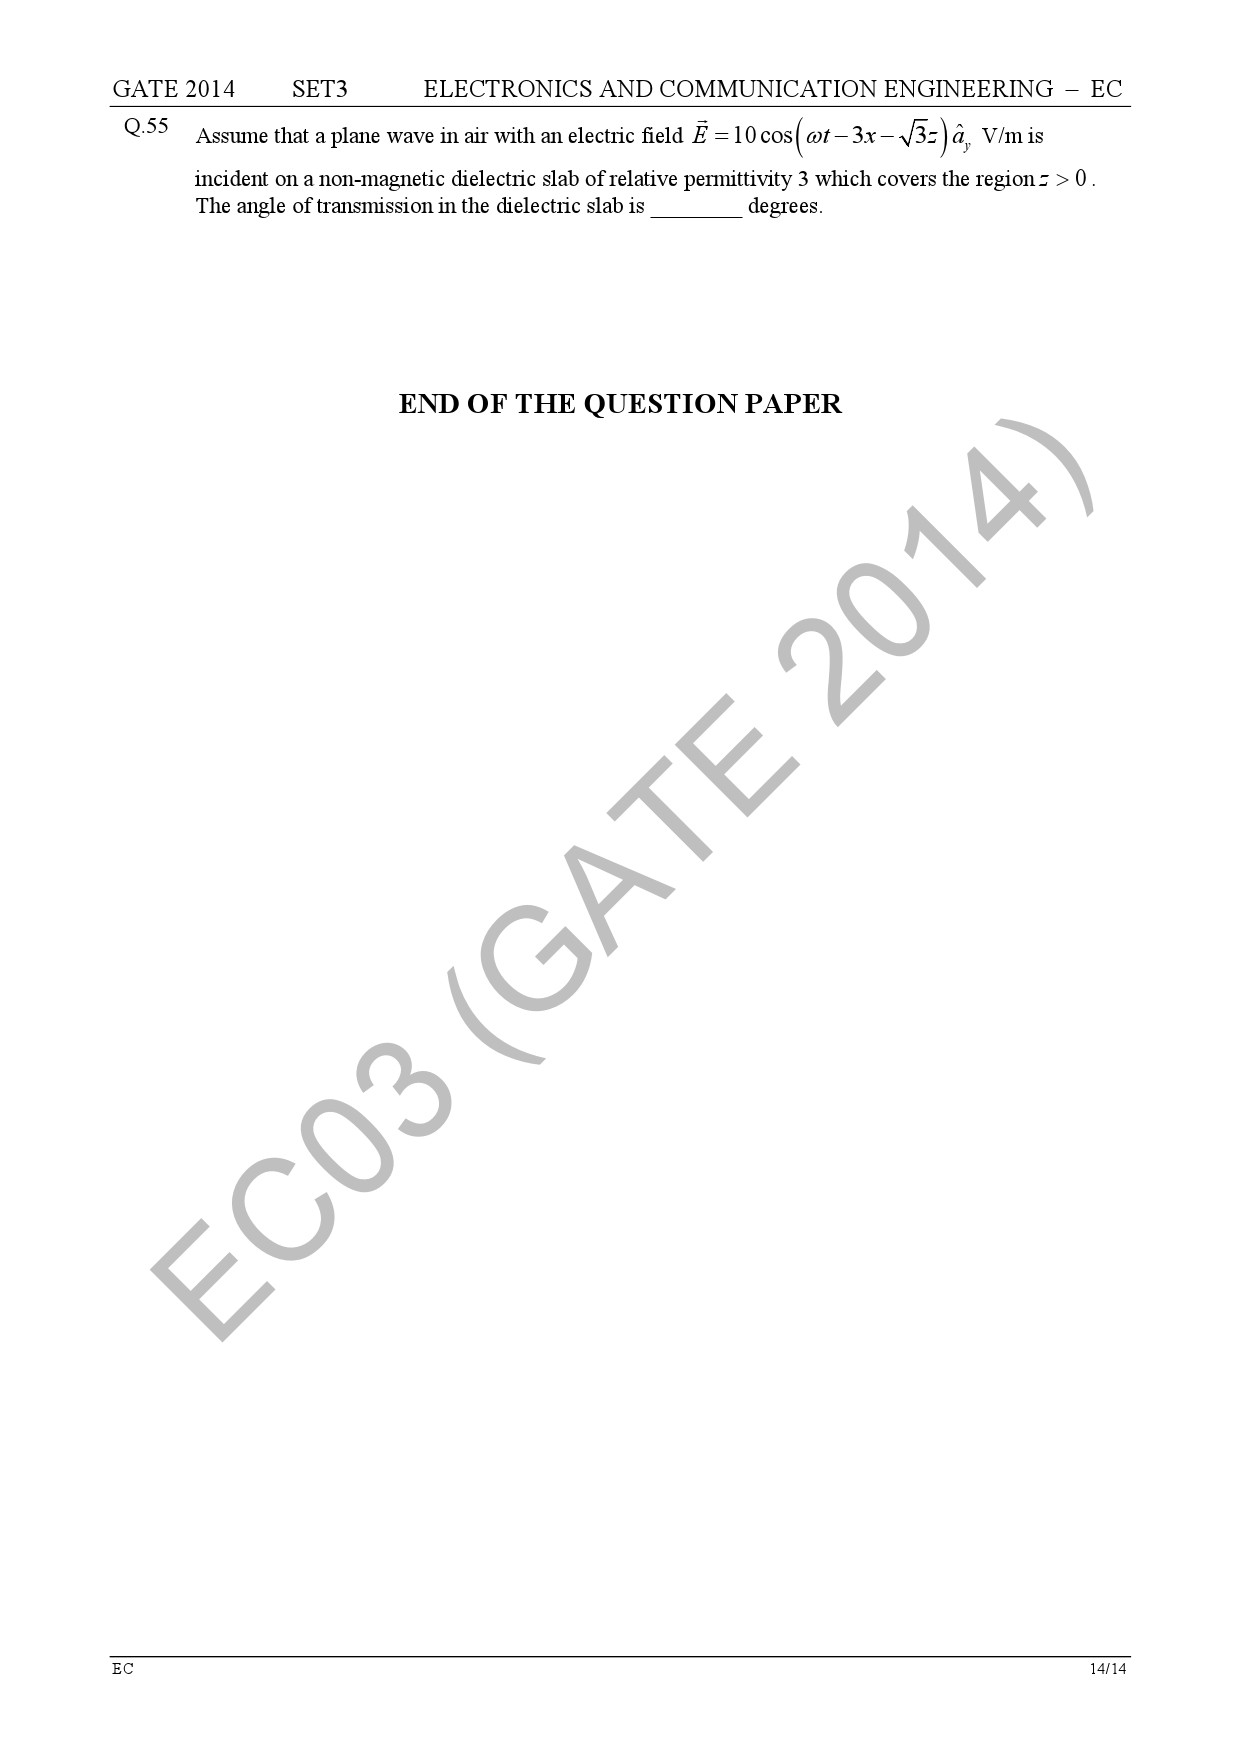 GATE Exam Question Paper 2014 Electronics and Communication Engineering Set 3 21